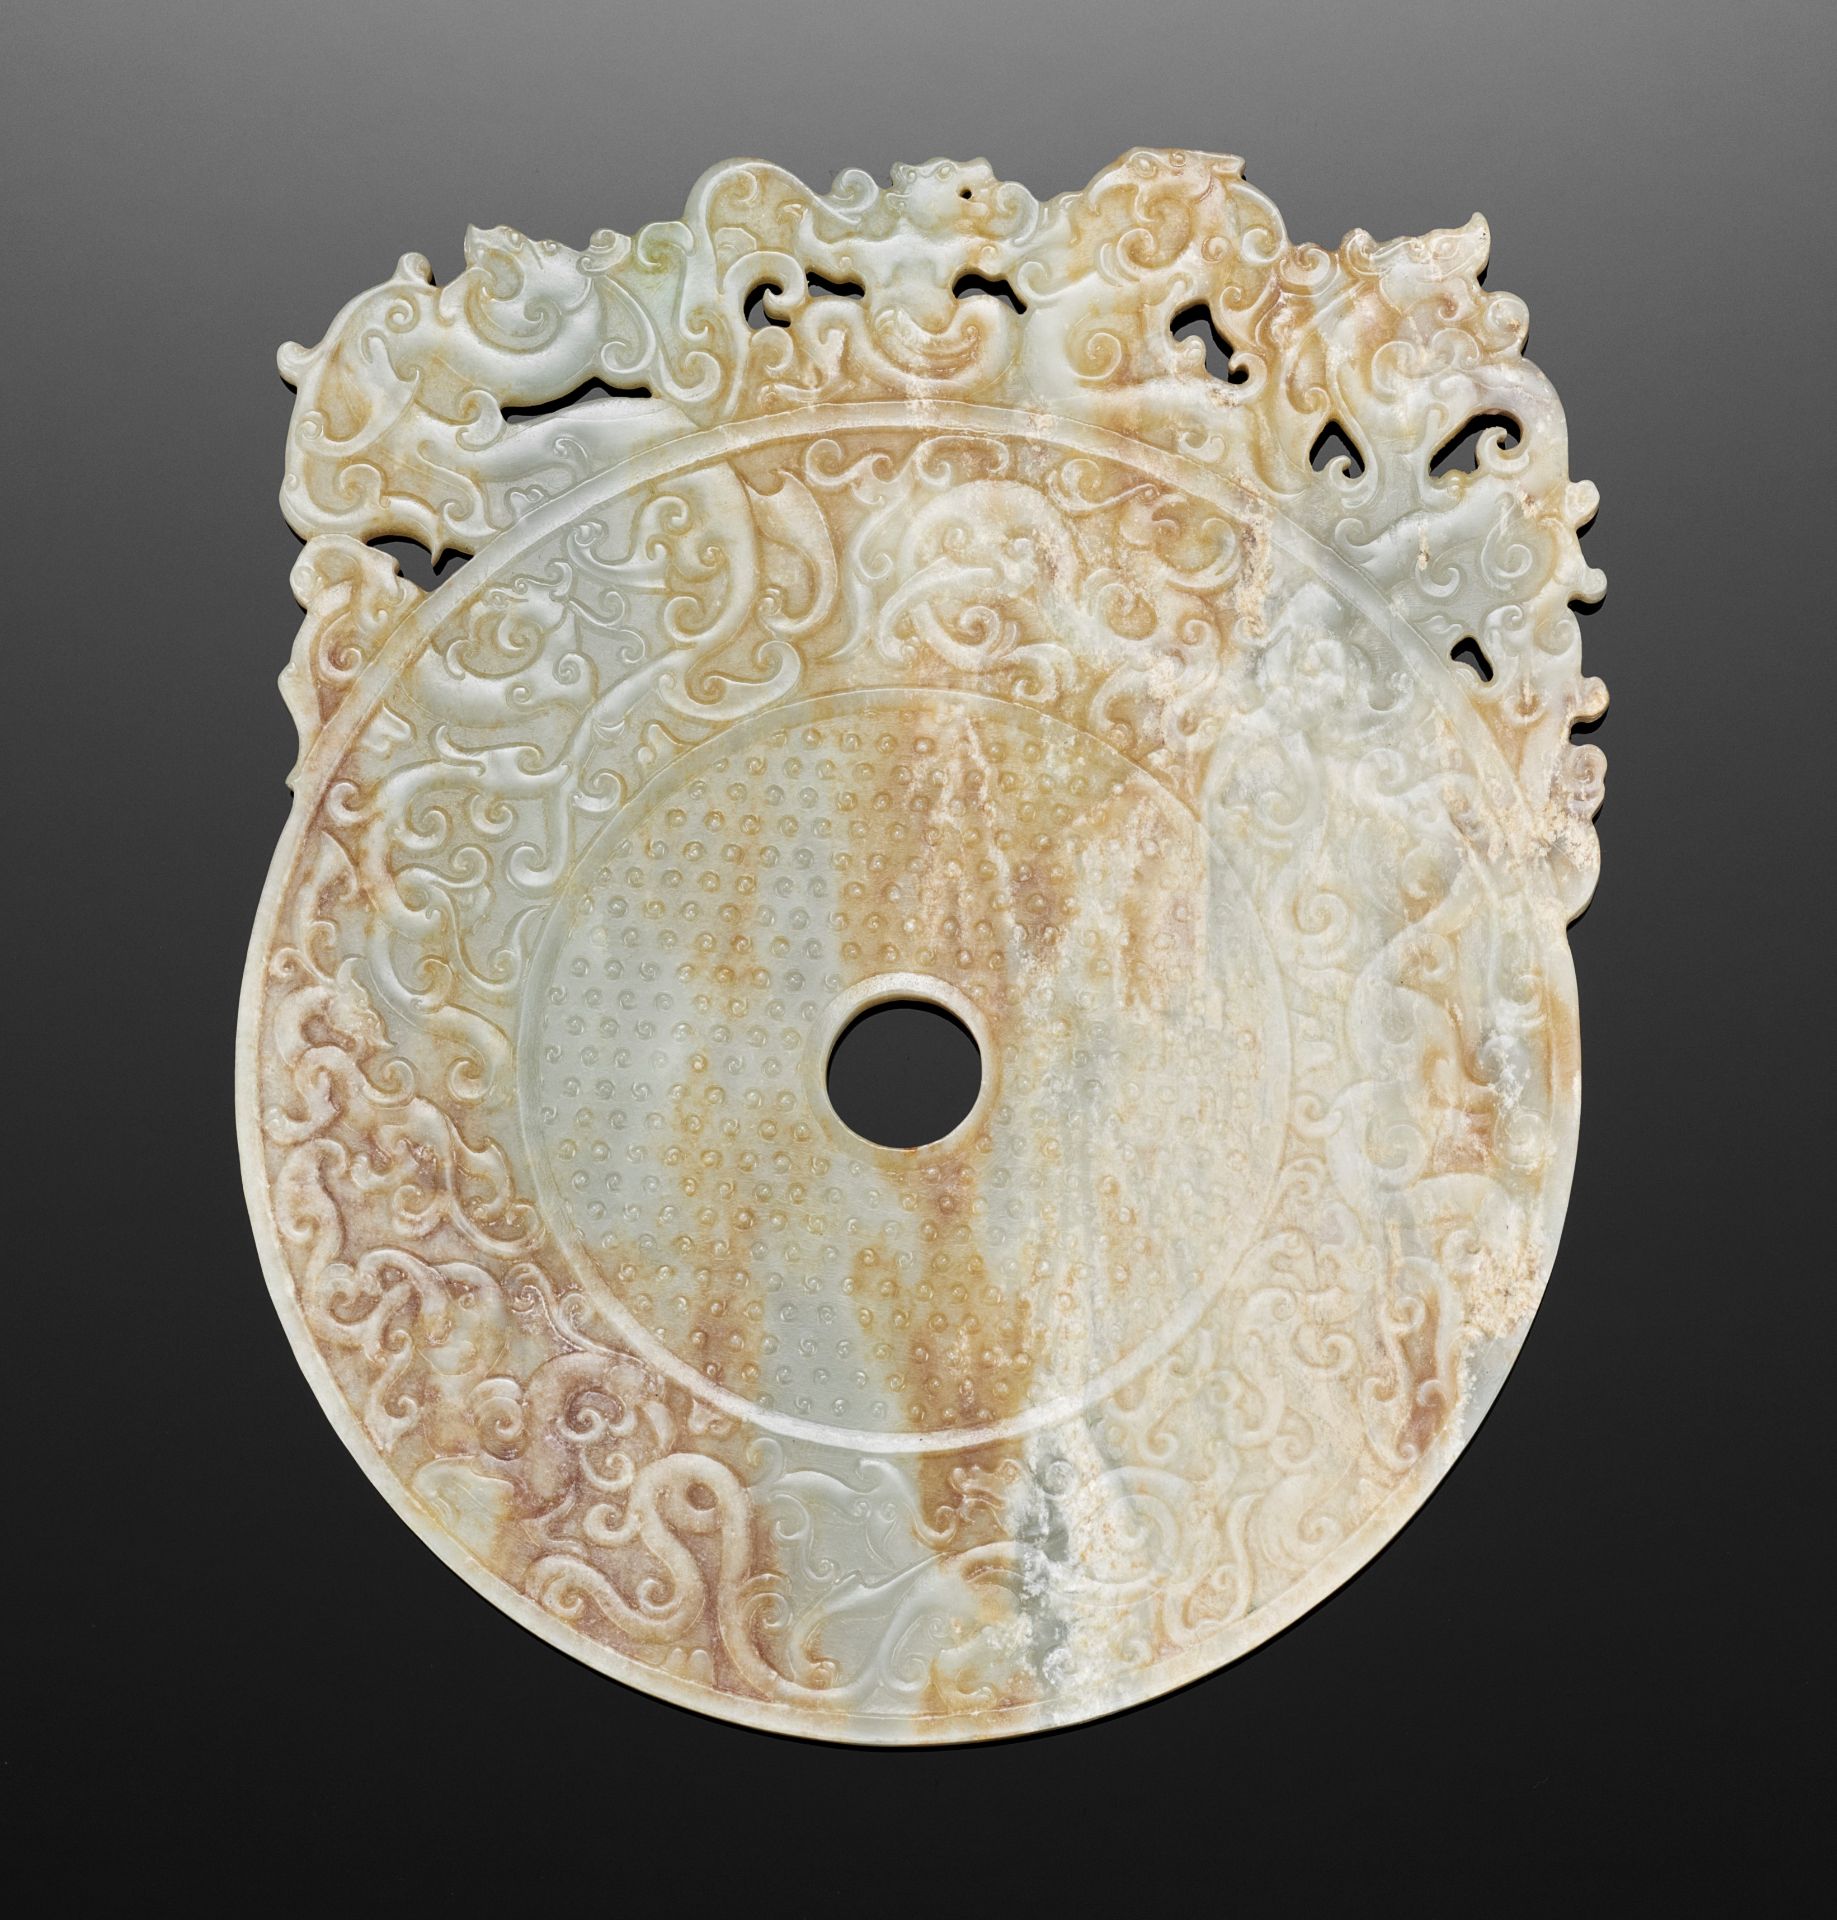 AN ARCHAISTIC BI DISC WITH PHOENIXES AND CHILONG